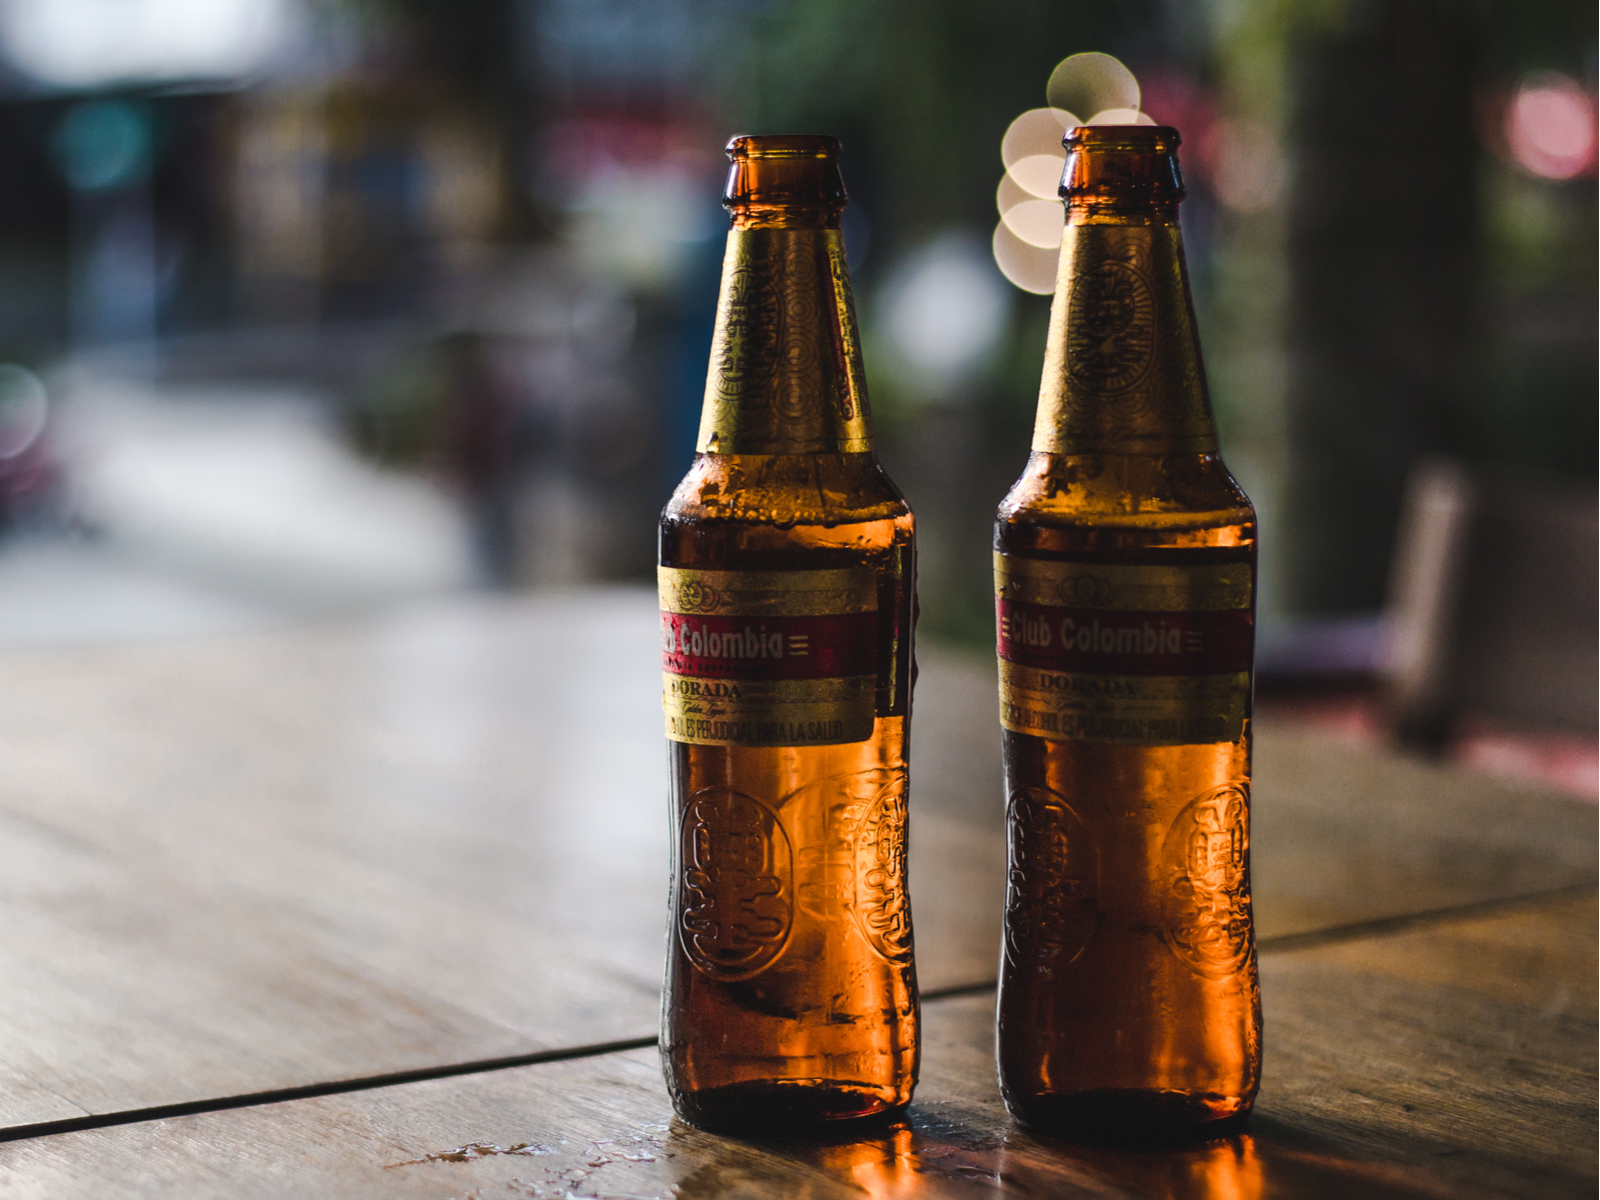 Brown bottles of Colombian beer sit on a table